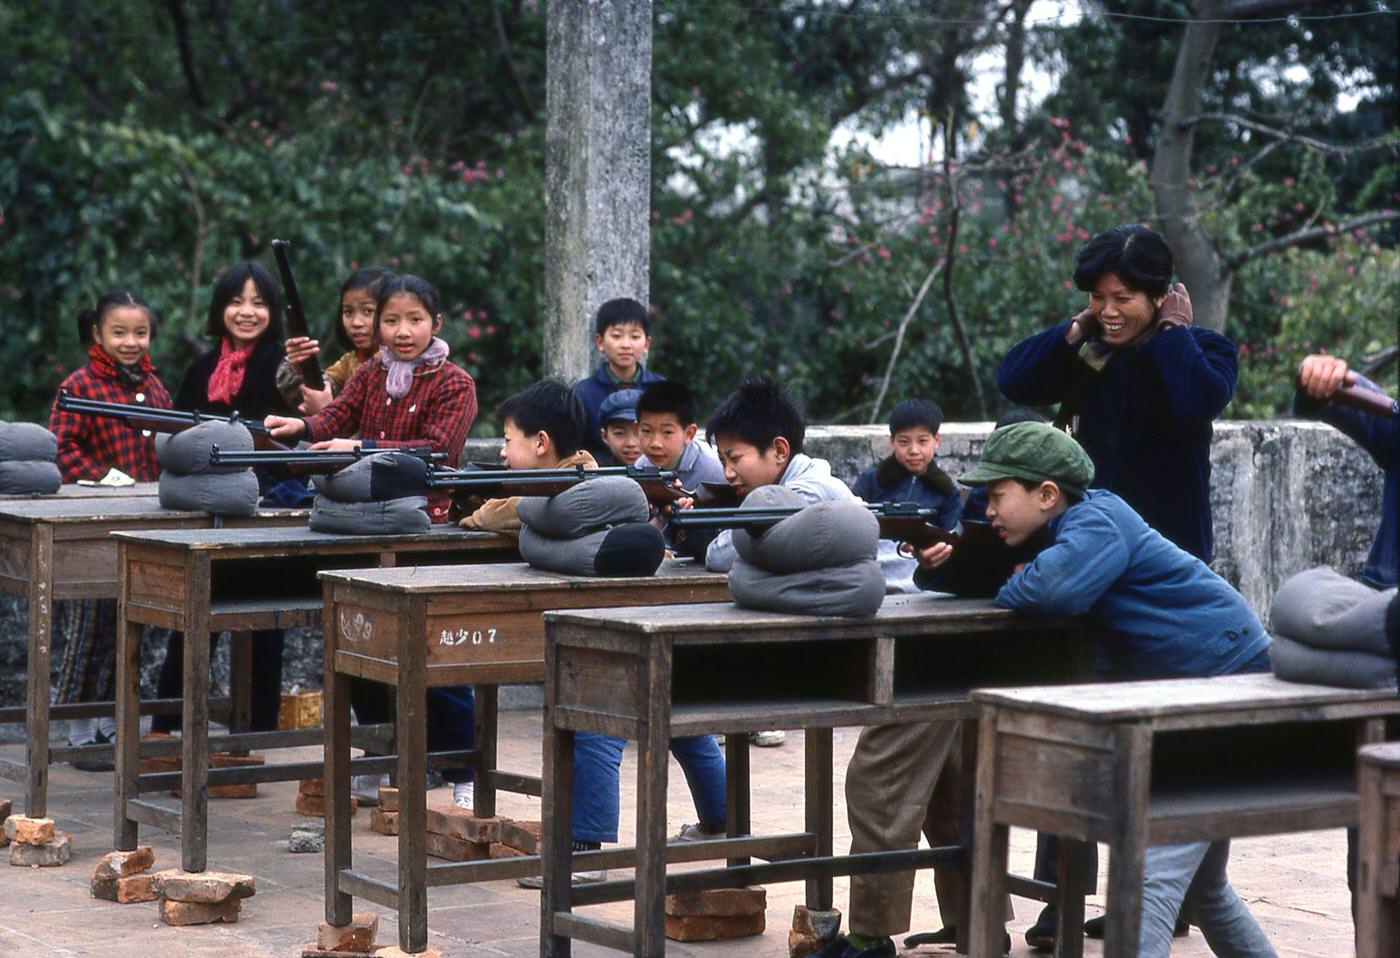 Elementary School Children Practice shoot at Targets in Guangdong, 1979